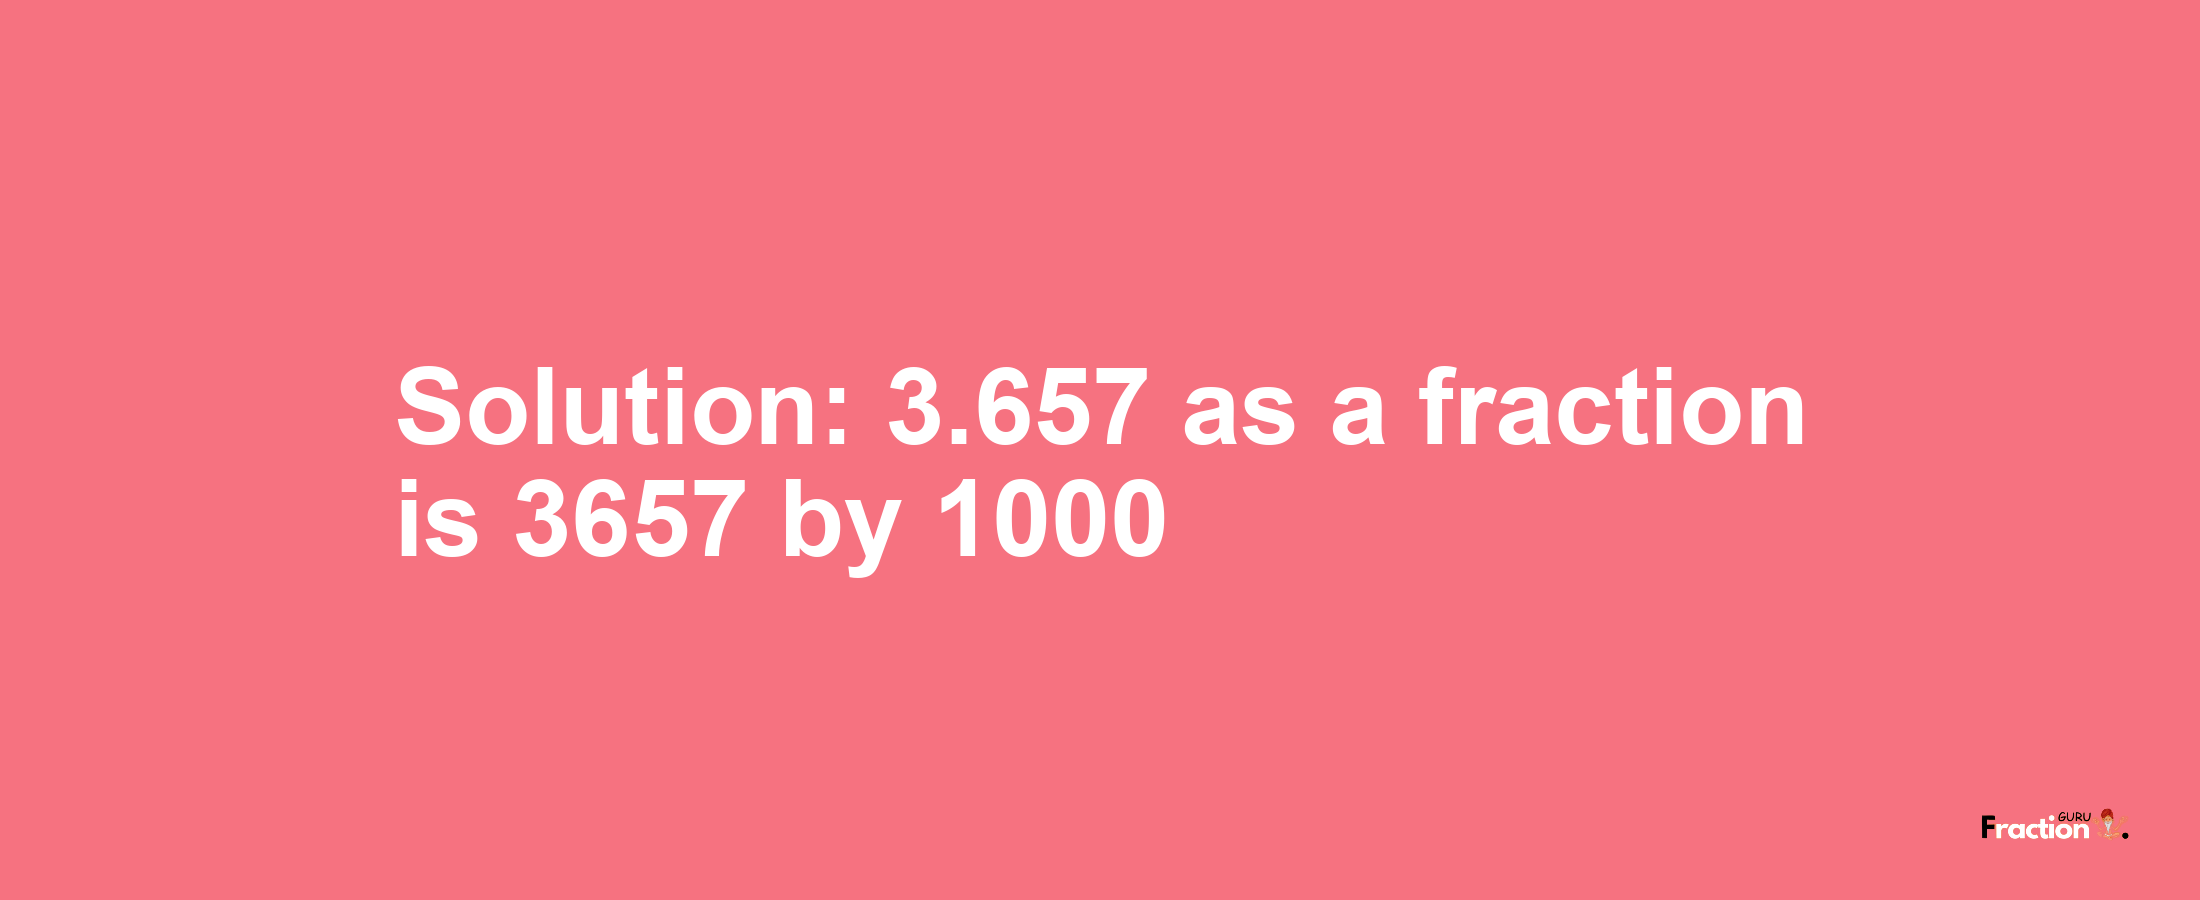 Solution:3.657 as a fraction is 3657/1000